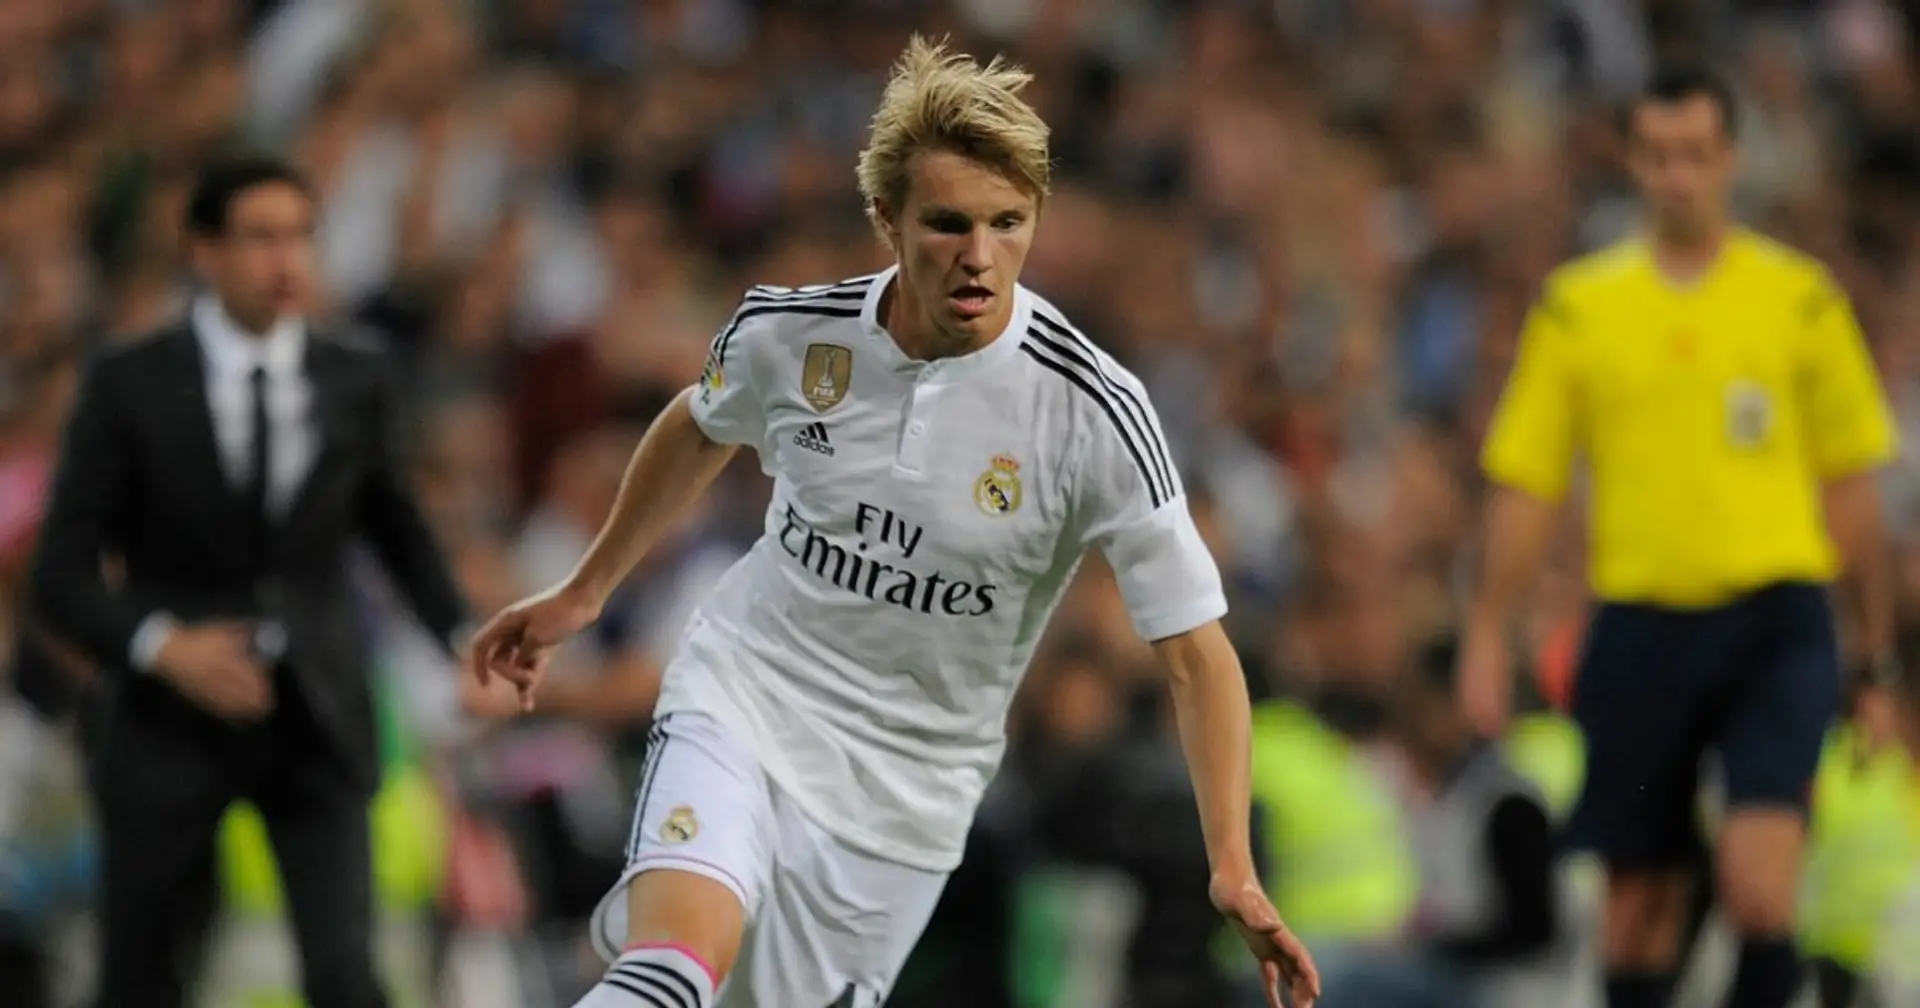 Martin Odegaard included on list of top 10 playmakers in the world